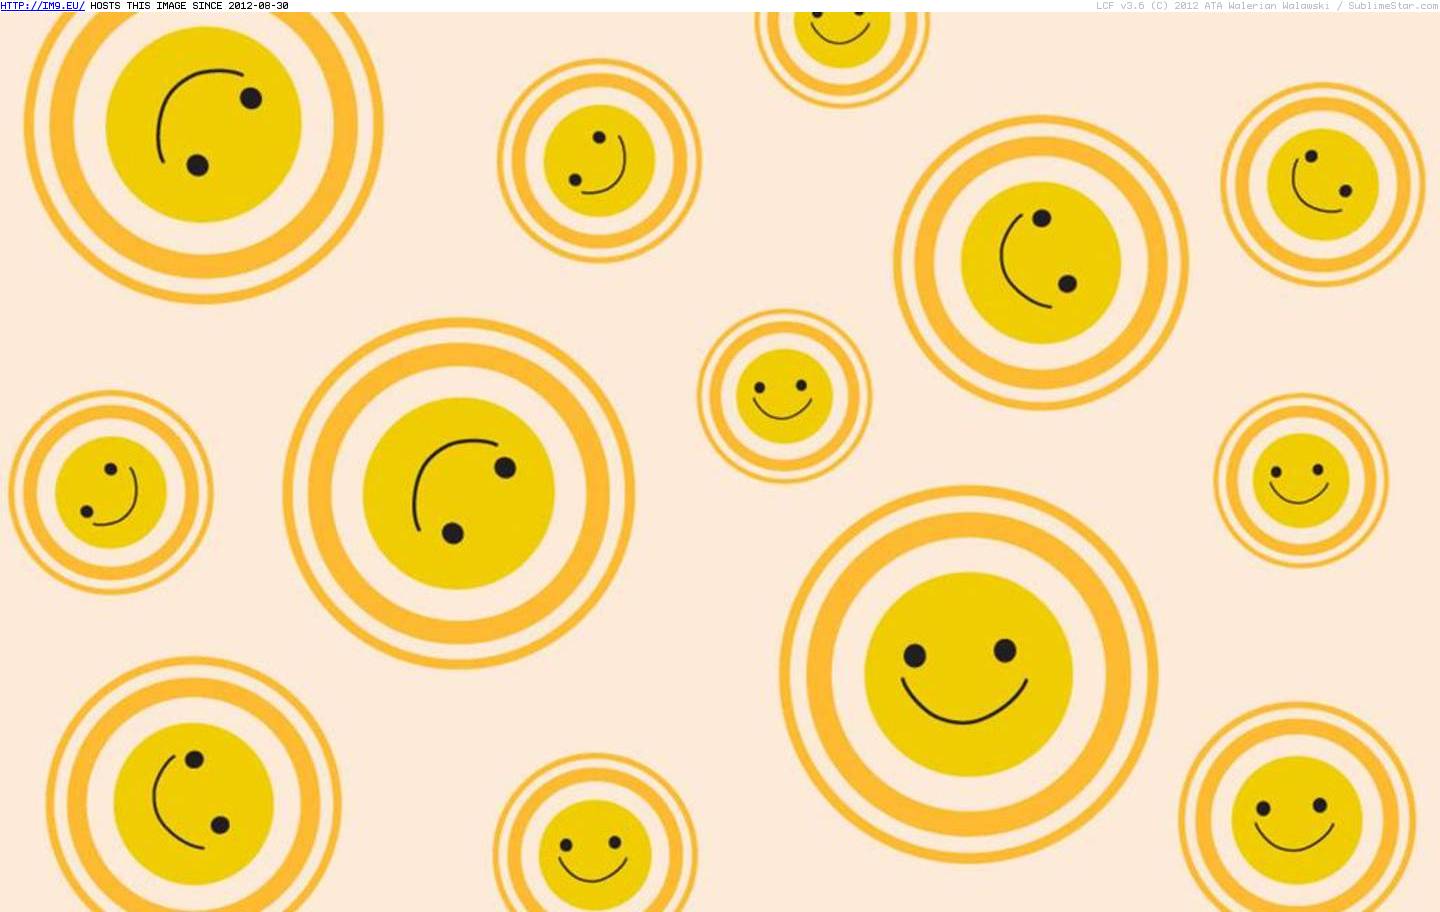 Smile If Your Happy (smiley wallpaper) (in Smiley Wallpapers)